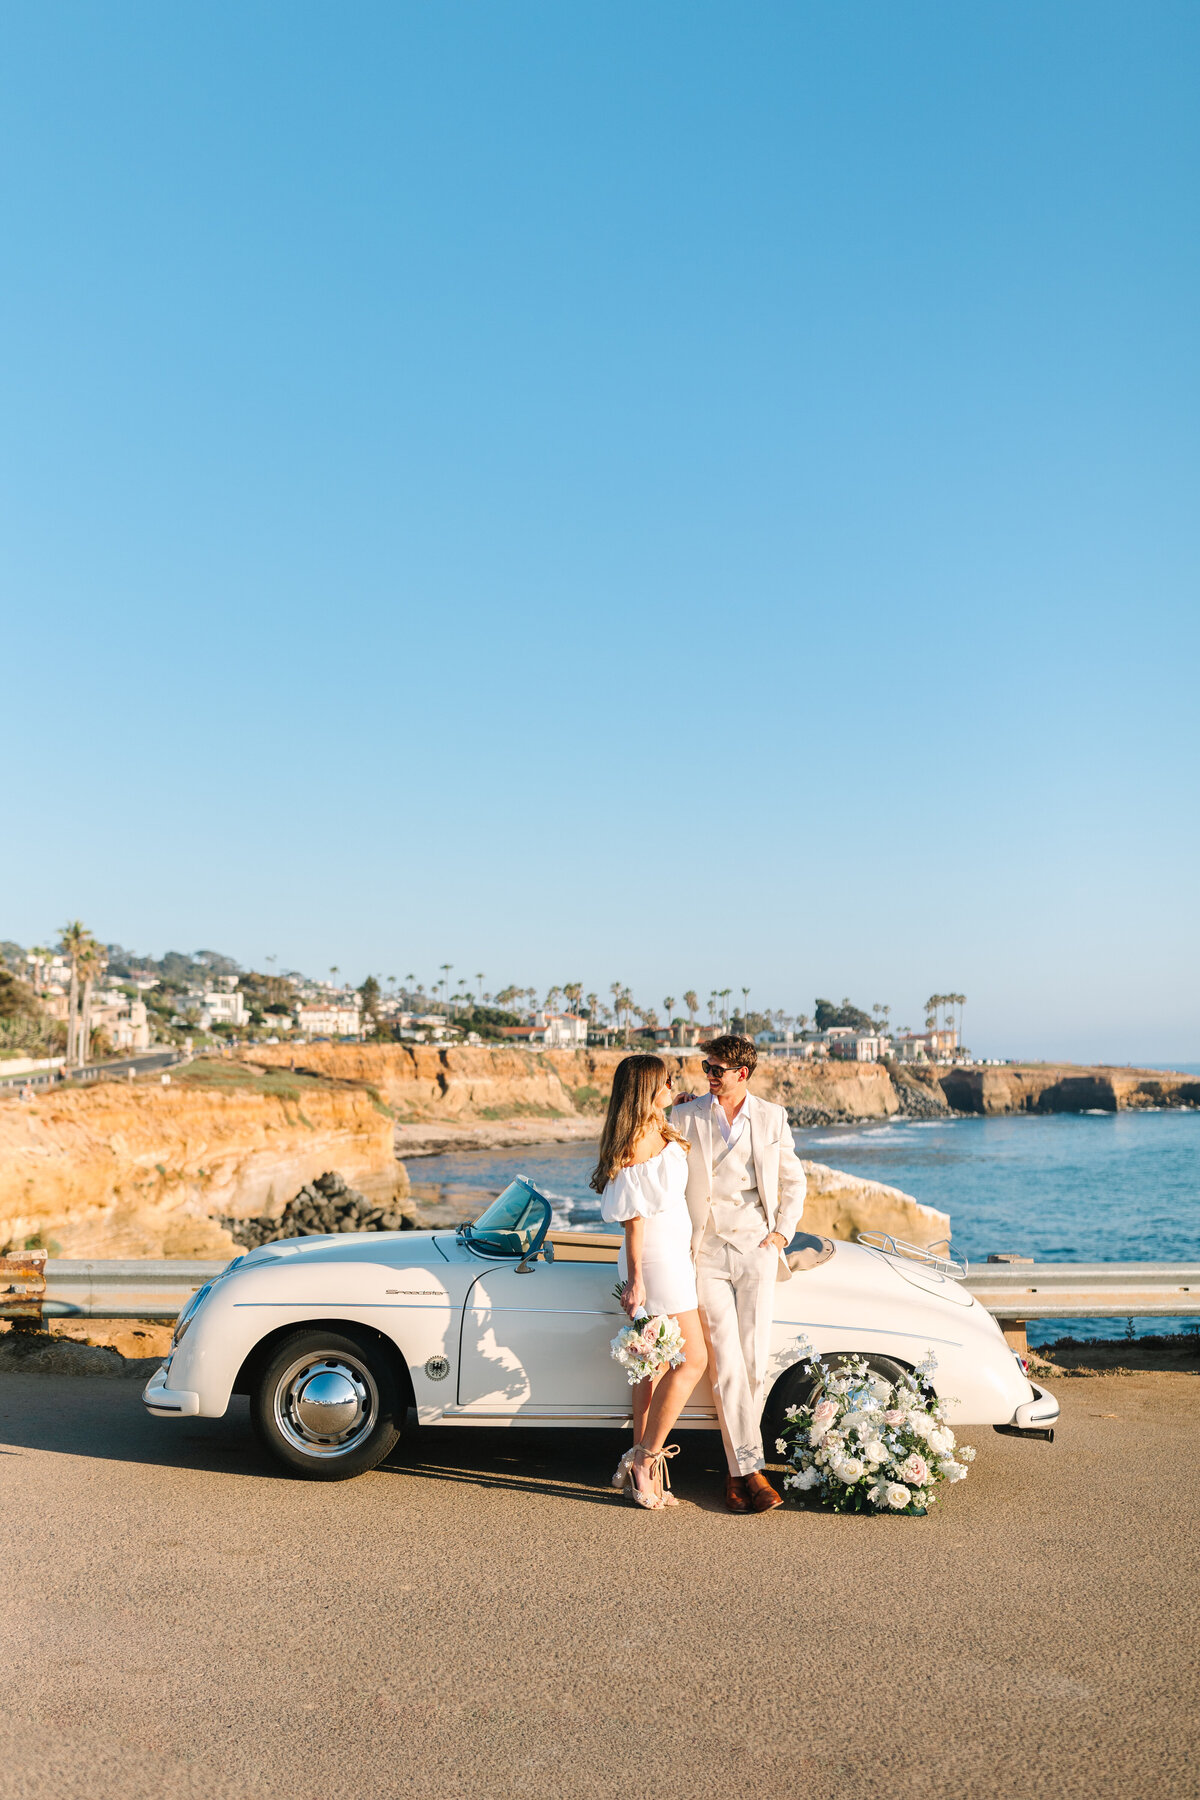 bride and groom standing in front of white vintage car by the beach.